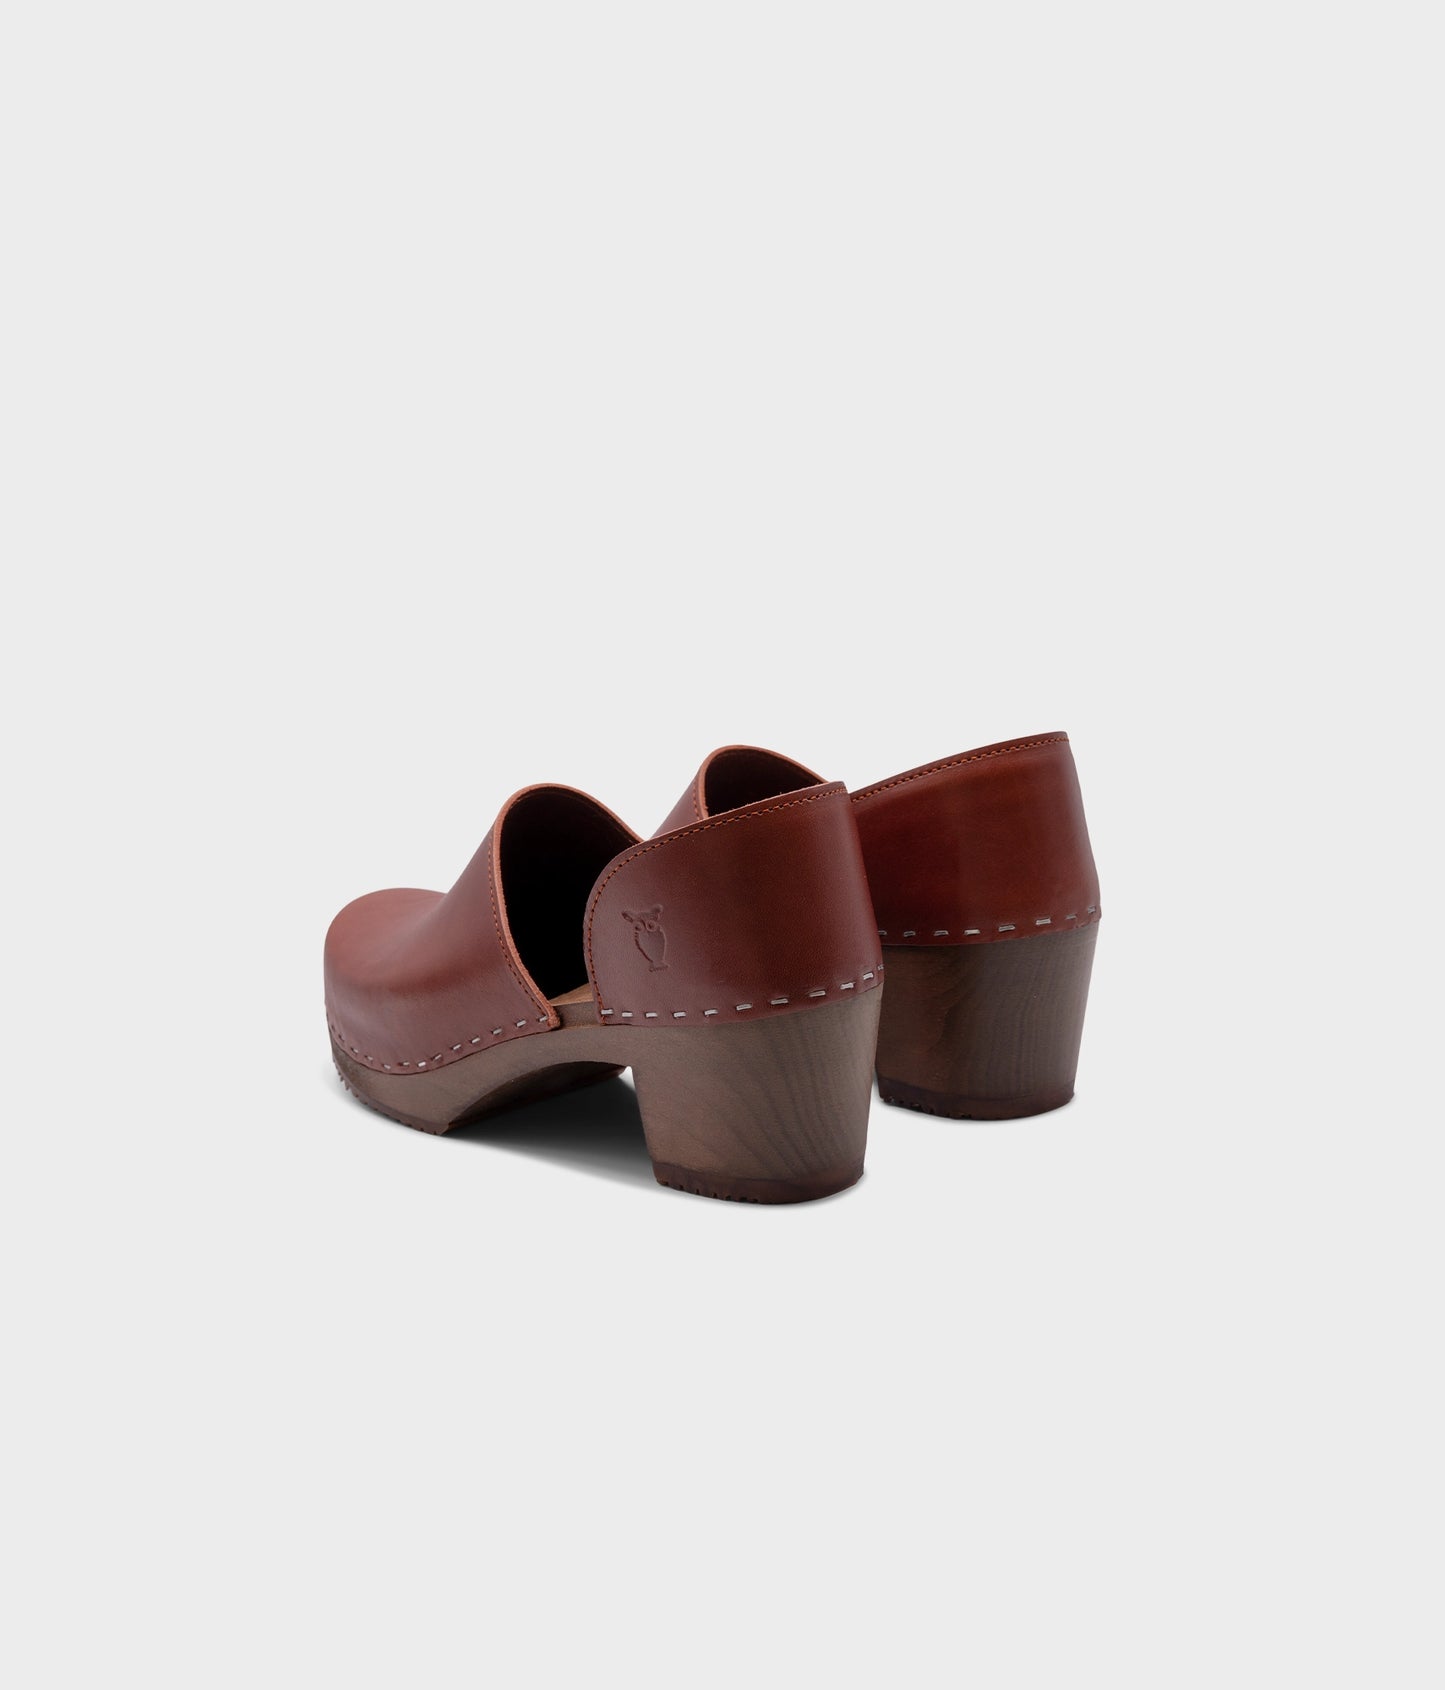 high heeled closed-back clogs in cognac red vegetable tanned leather stapled on a dark wooden base